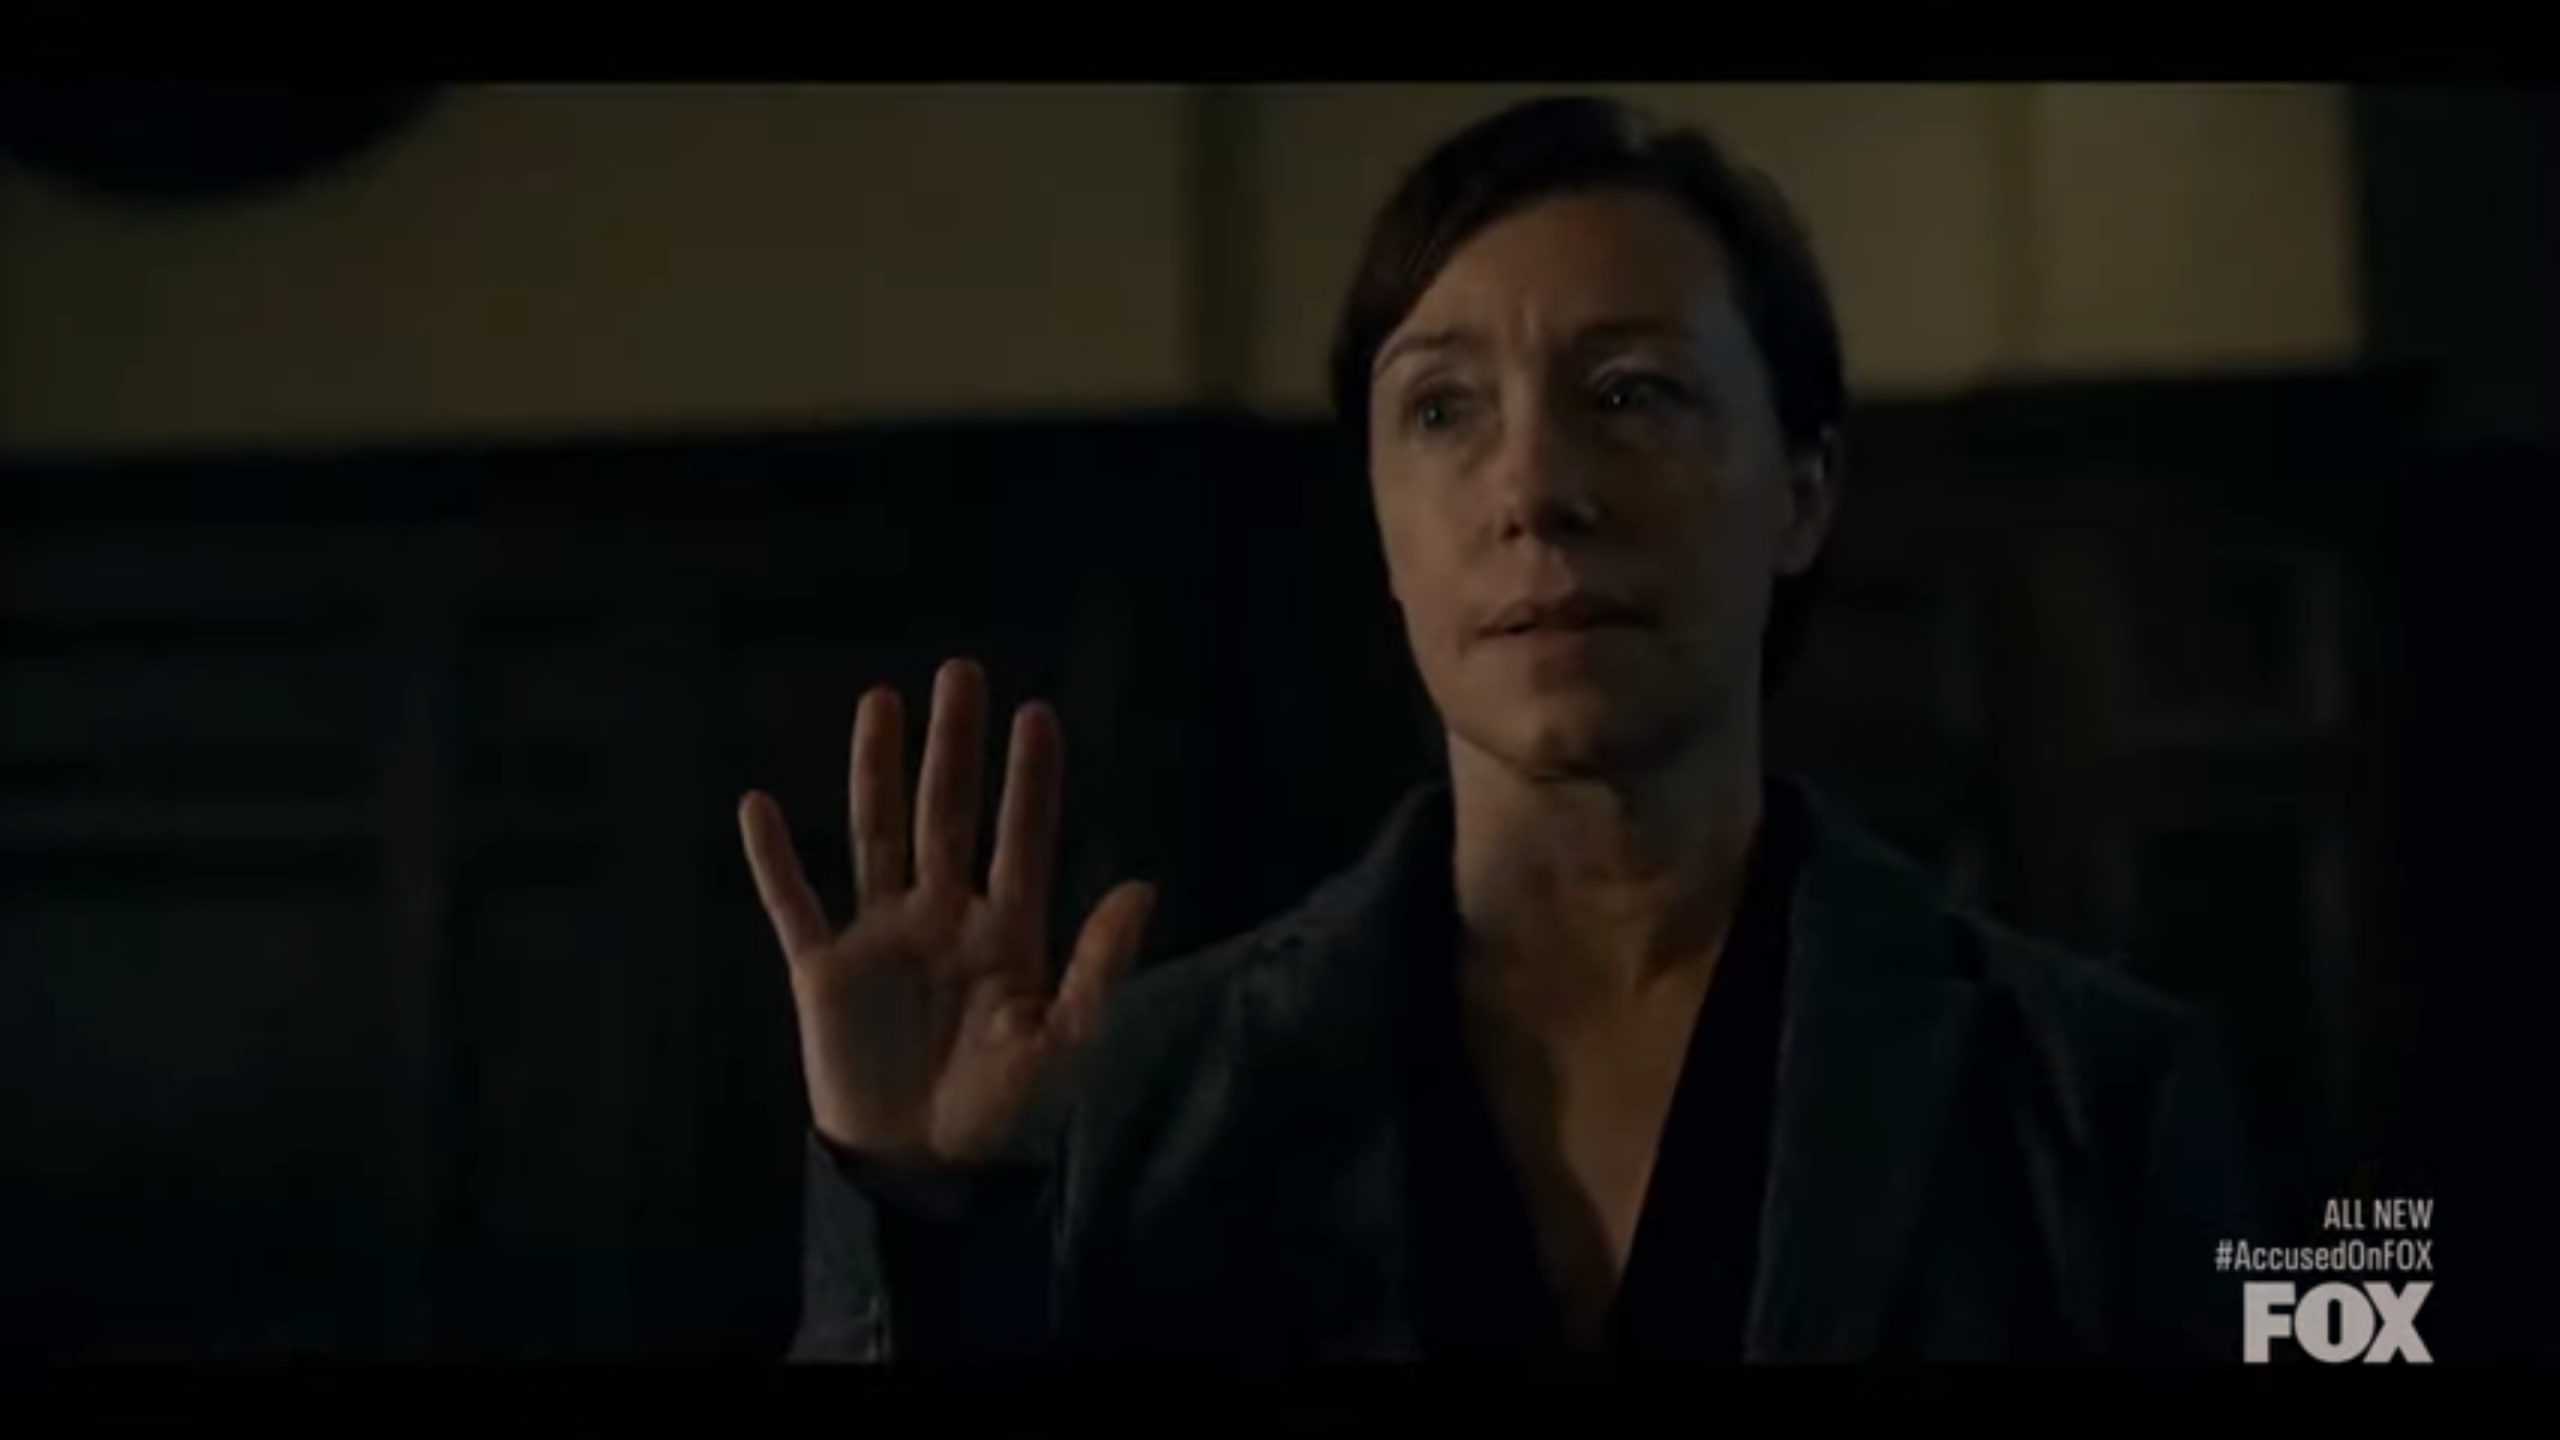 Molly Parker as Laura testifying